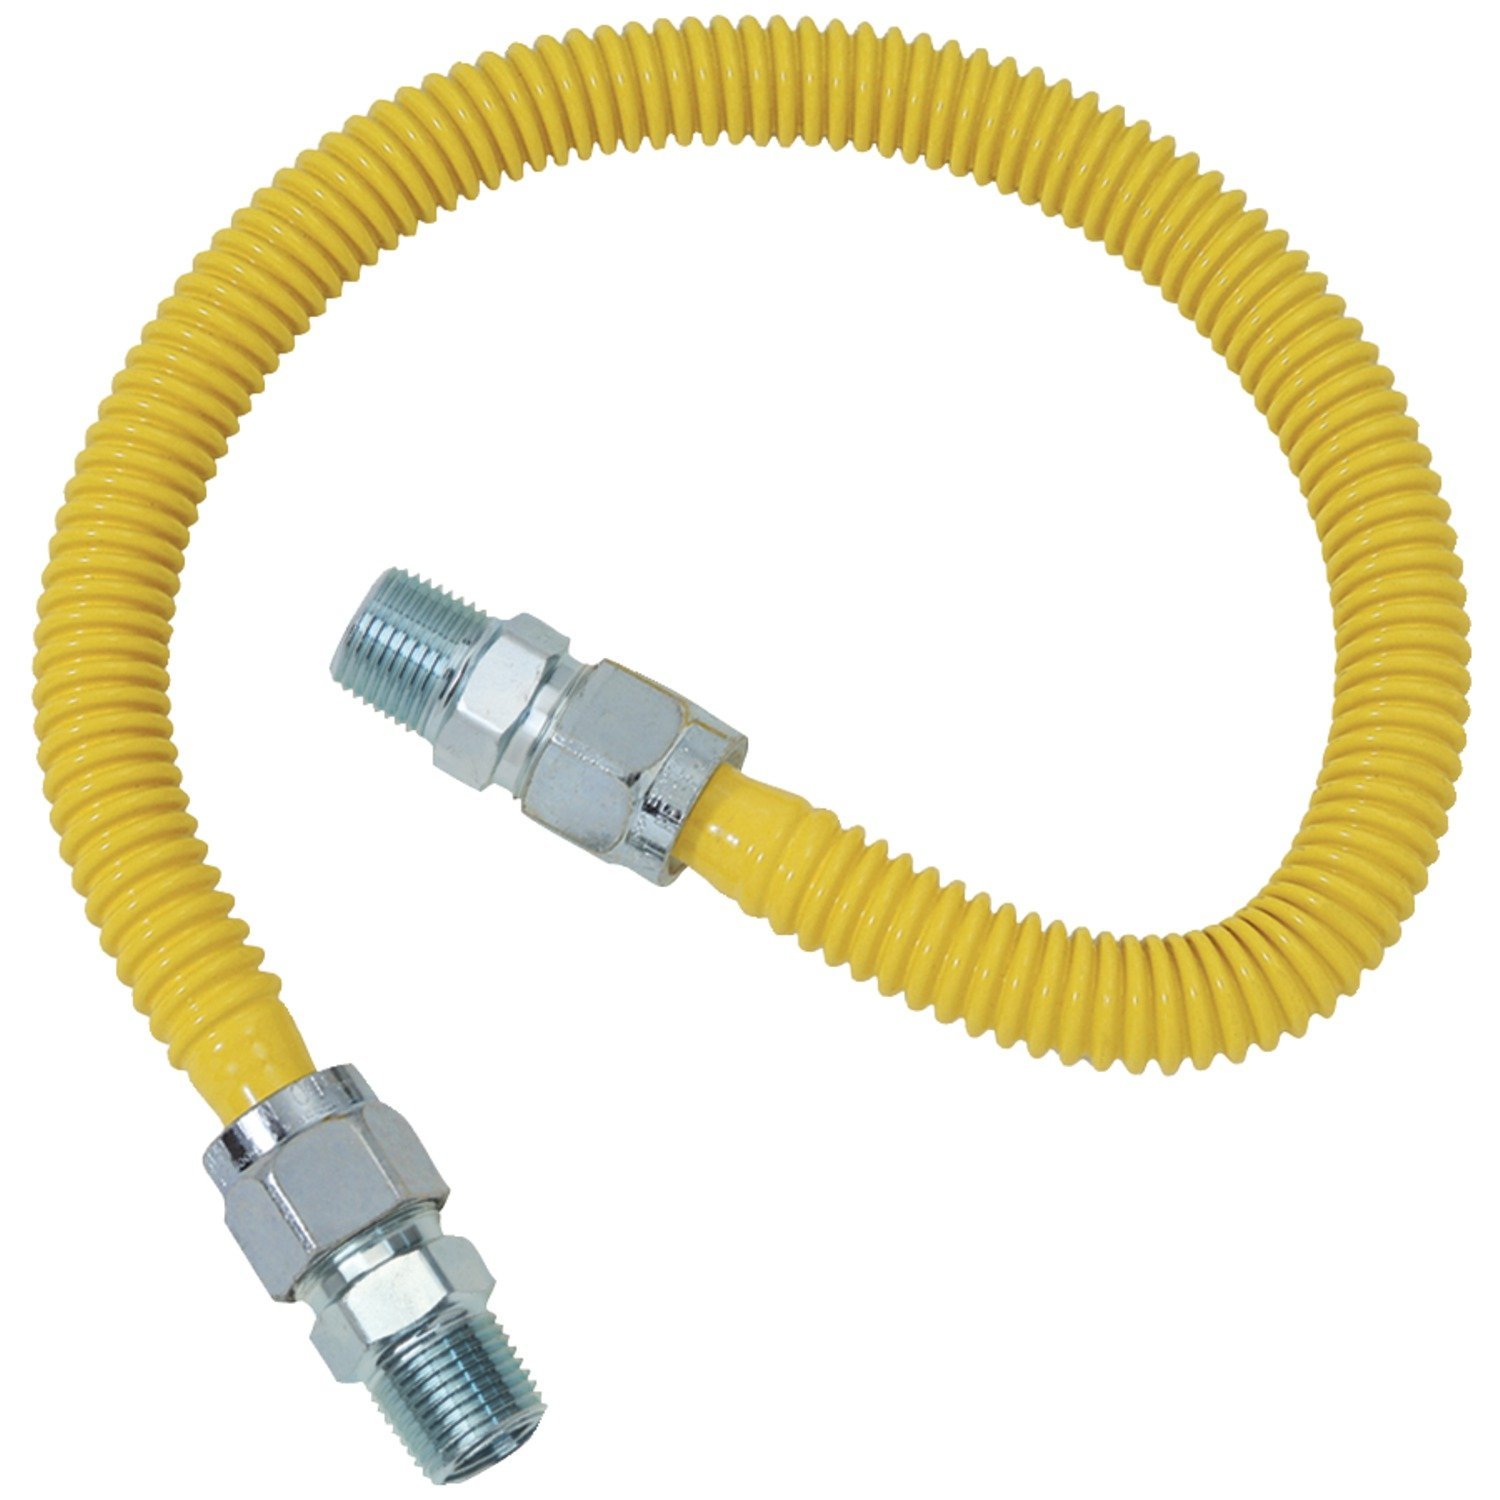 UPC 026613112374 product image for Brasscraft CSSC44-48 Gas Connector Standard, 48